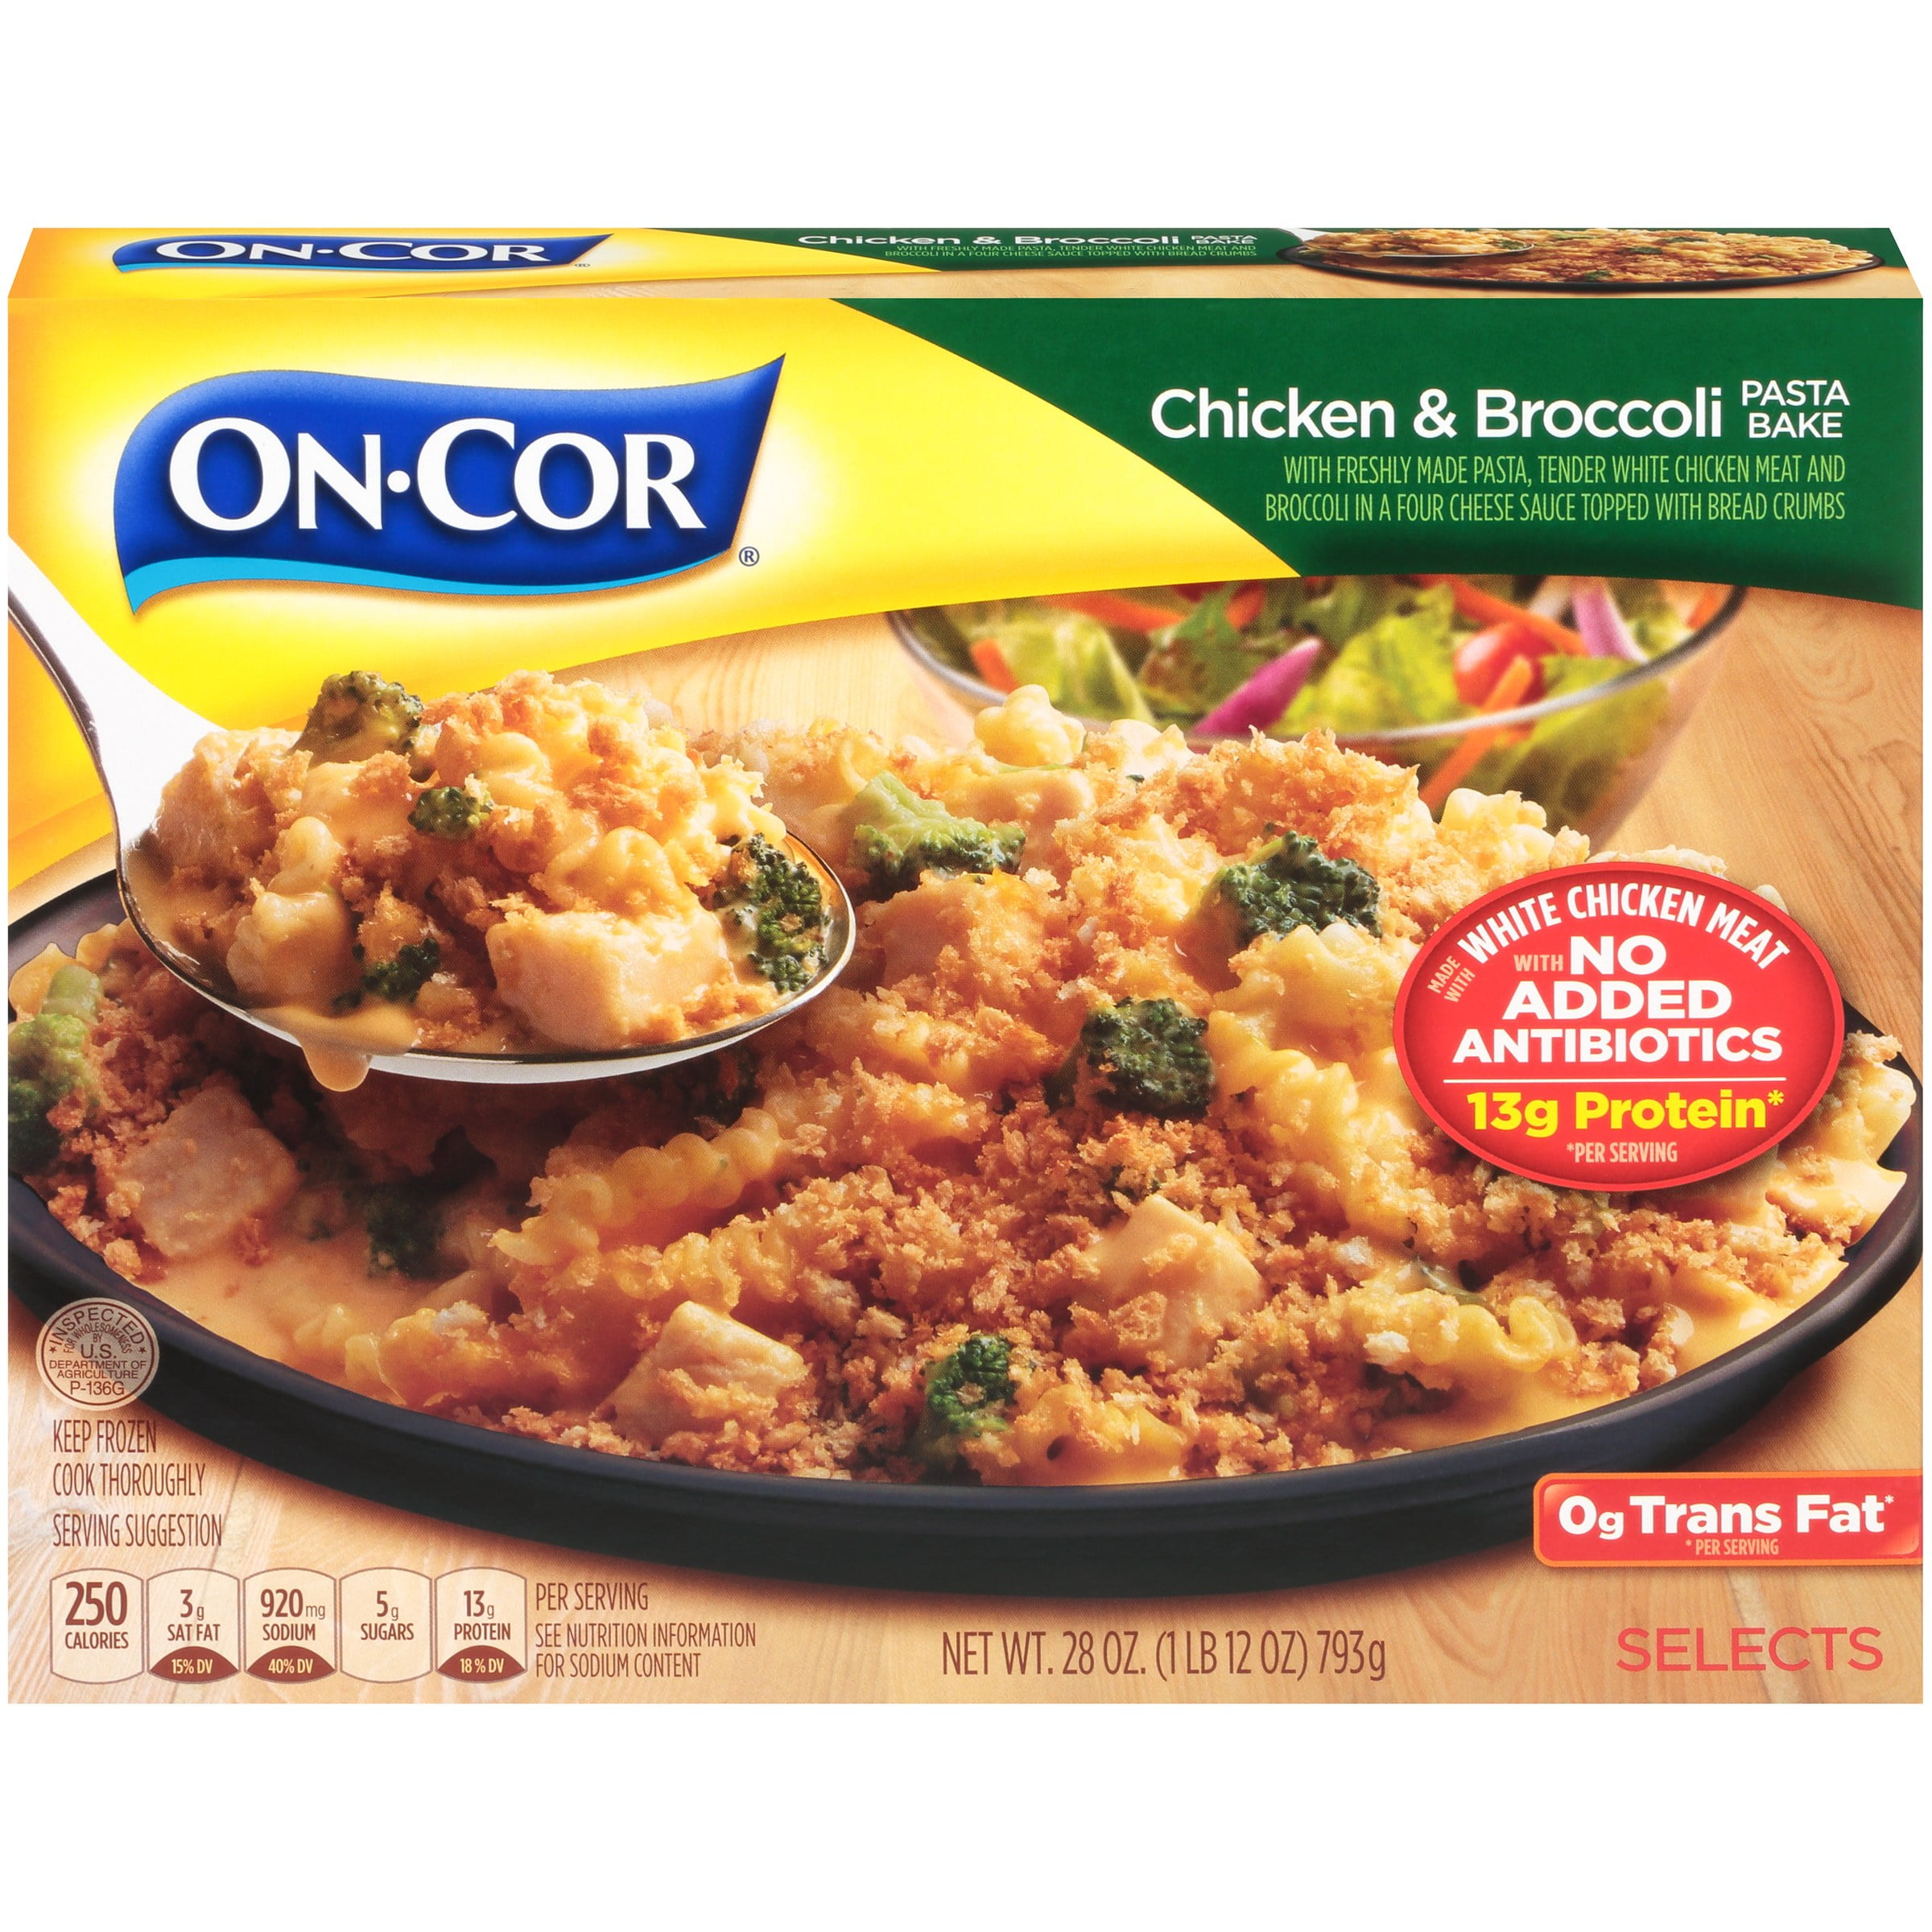 On-Cor Chicken & Broccoli Pasta Bake Packaged Meal, 28 oz, (Frozen)